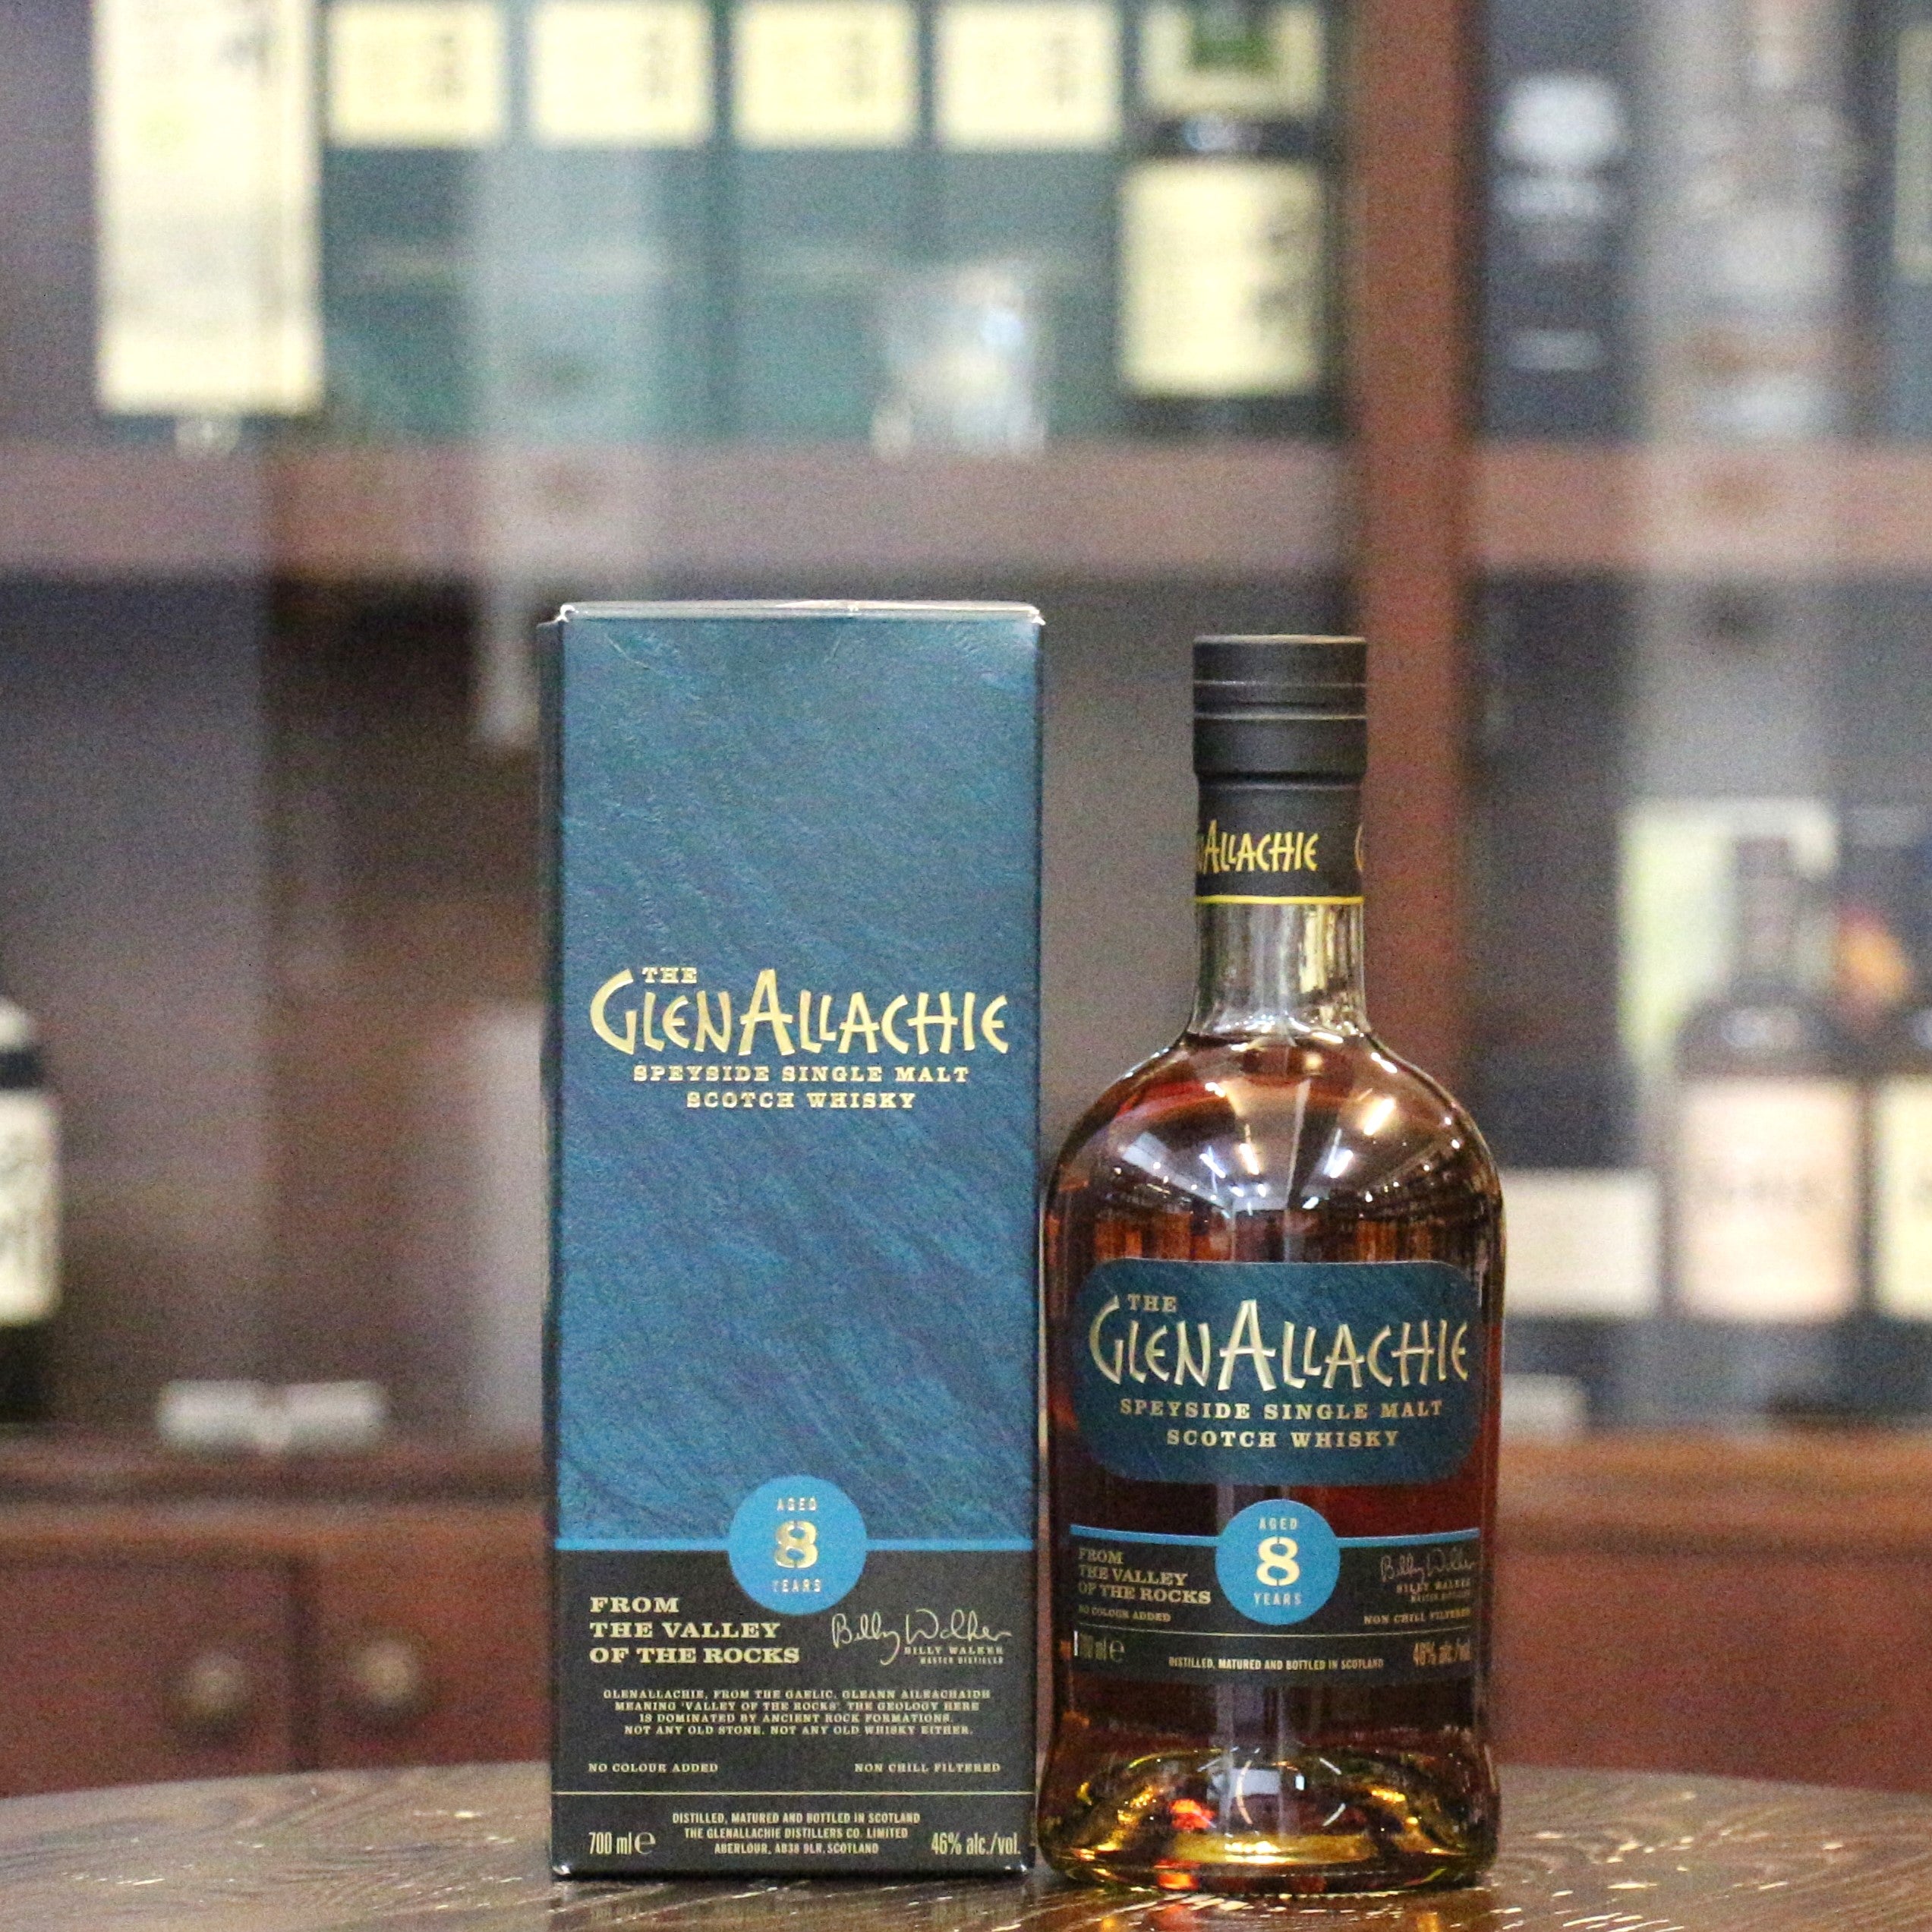 GlenAllachie is currently one of Scotland's few independent distilleries, led by iconic Master Distiller Billy Walker (previously from Glendronach). This 8 years bottling has been matured in PX, Oloroso, Virgin Oak & 1st fill bourbon. Natural colour, Non chill filtered and released at a strength of 46% ABV. 